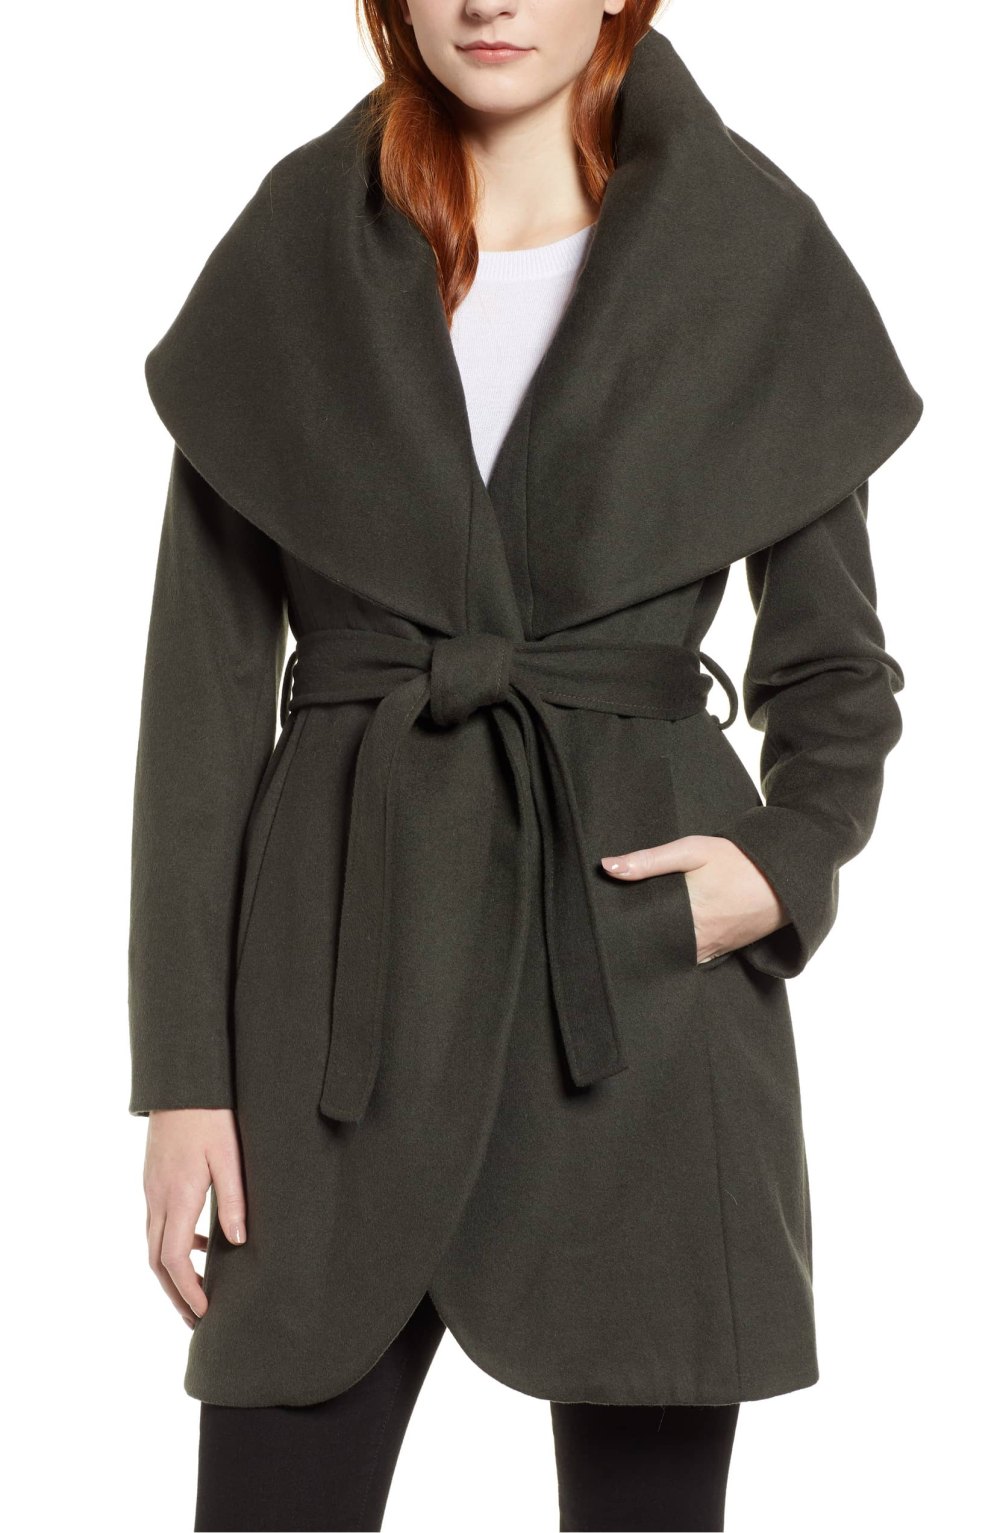 This Wrap Coat Is Perfect for Stylishly Braving the Cold